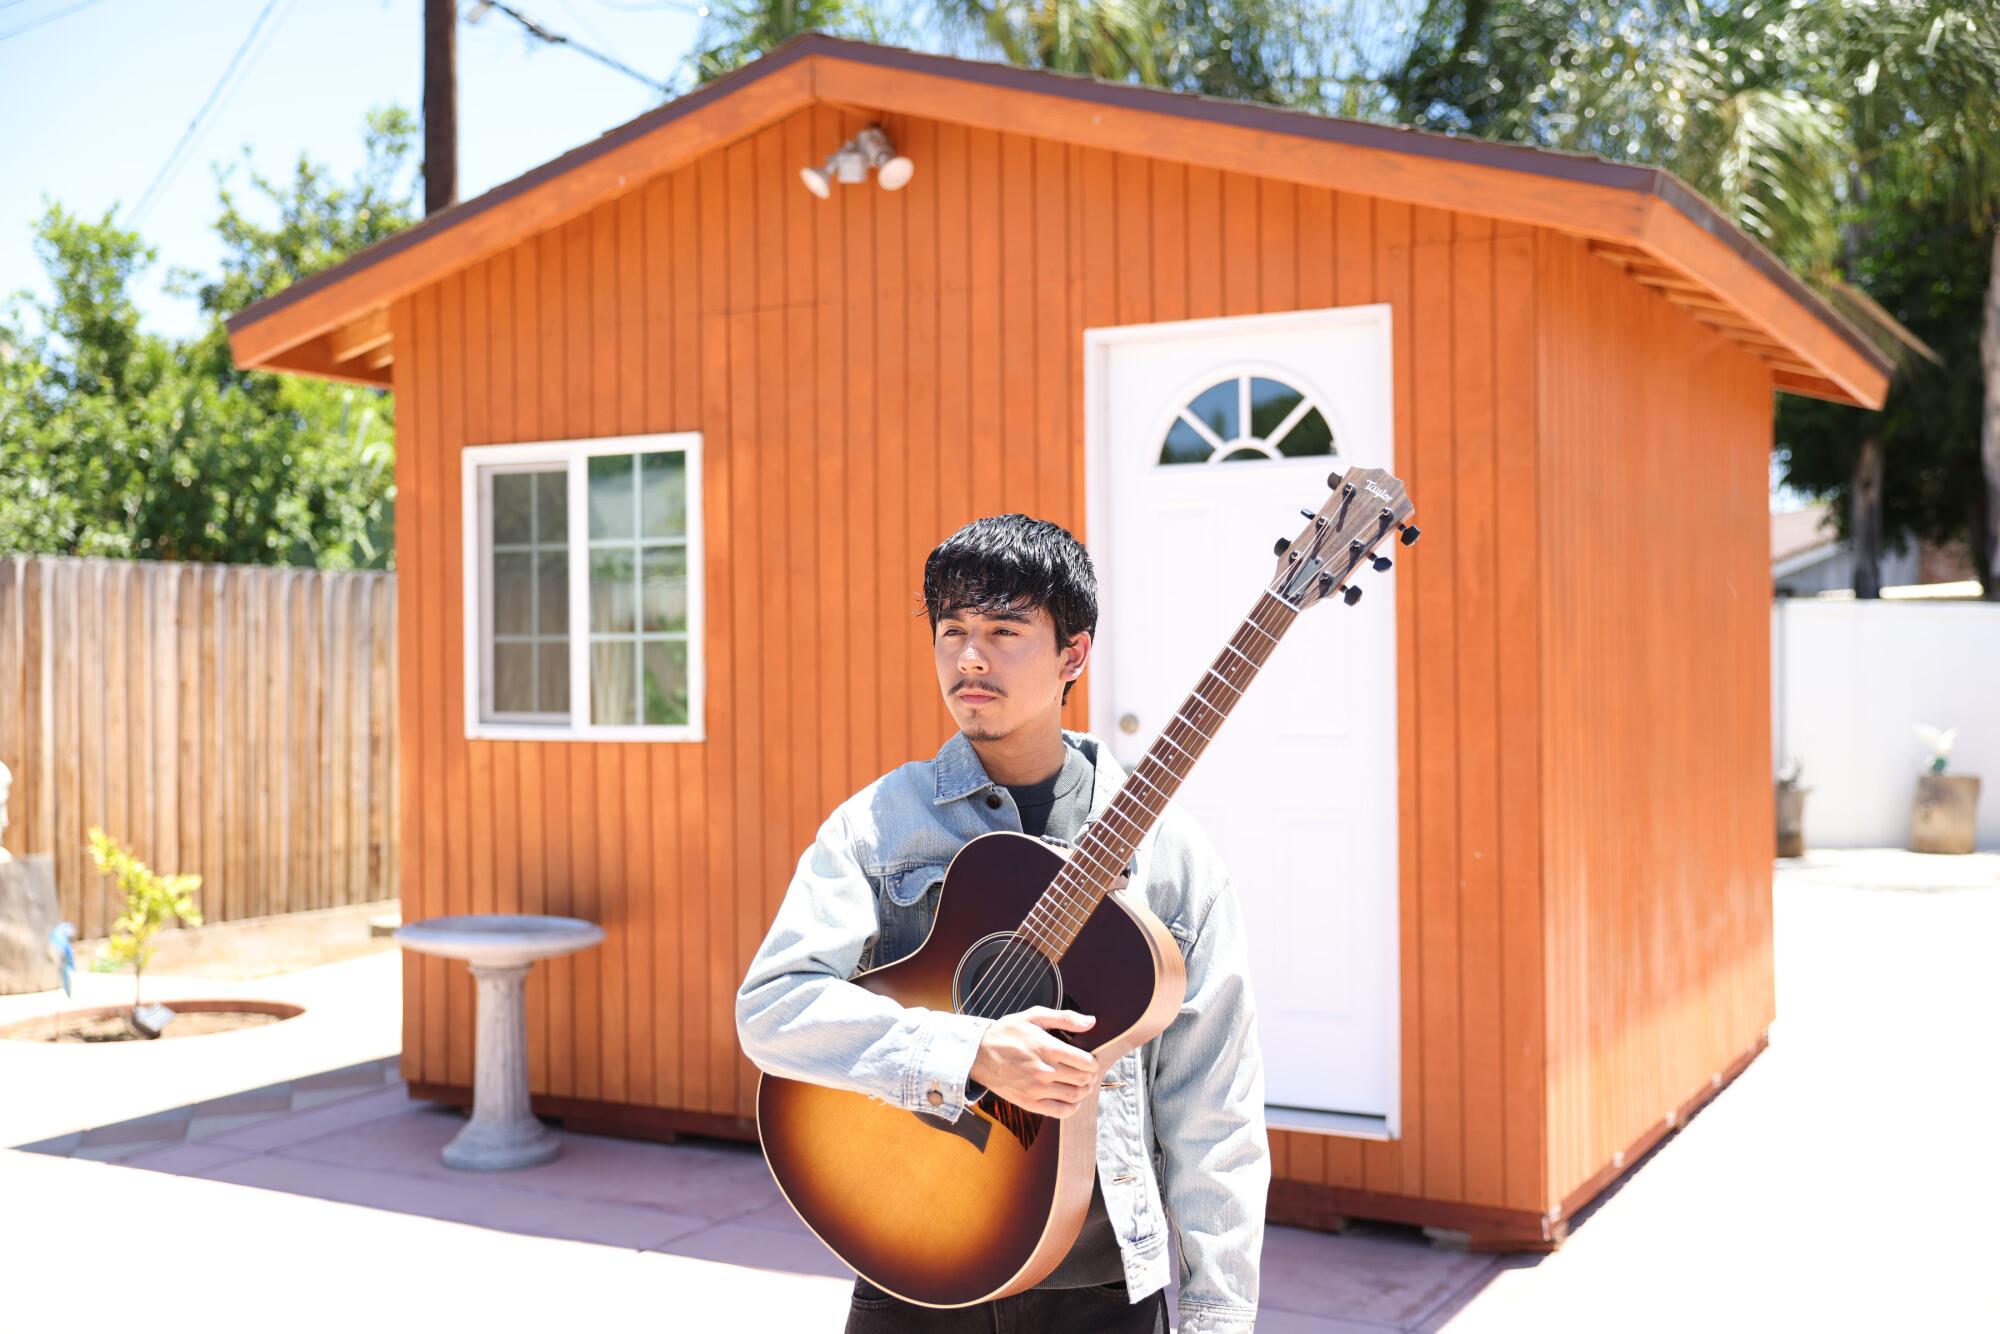 Singer-songwriter Ivan Cornejo taught himself how to play guitar at age 8 by watching YouTube tutorials.